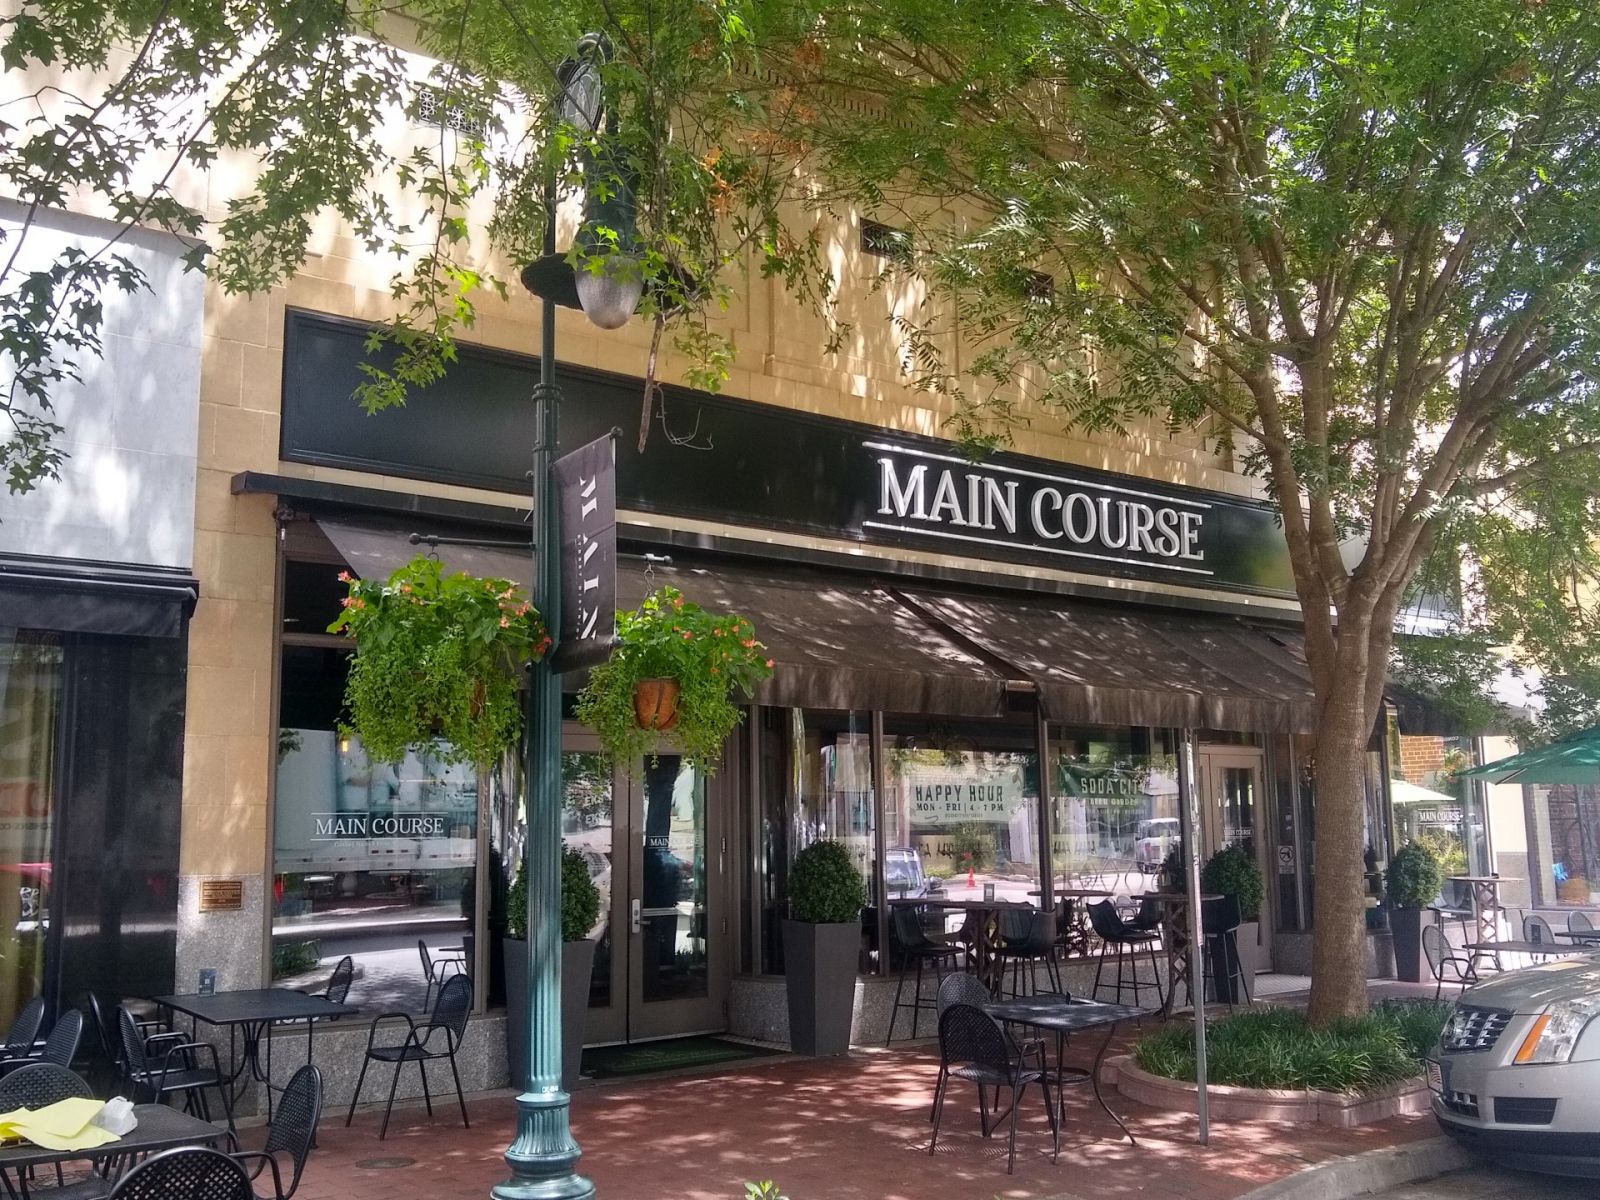 The Main Course at 1624 Main St. will be shutting down in late August. (Photo/Christina Lee Knauss)